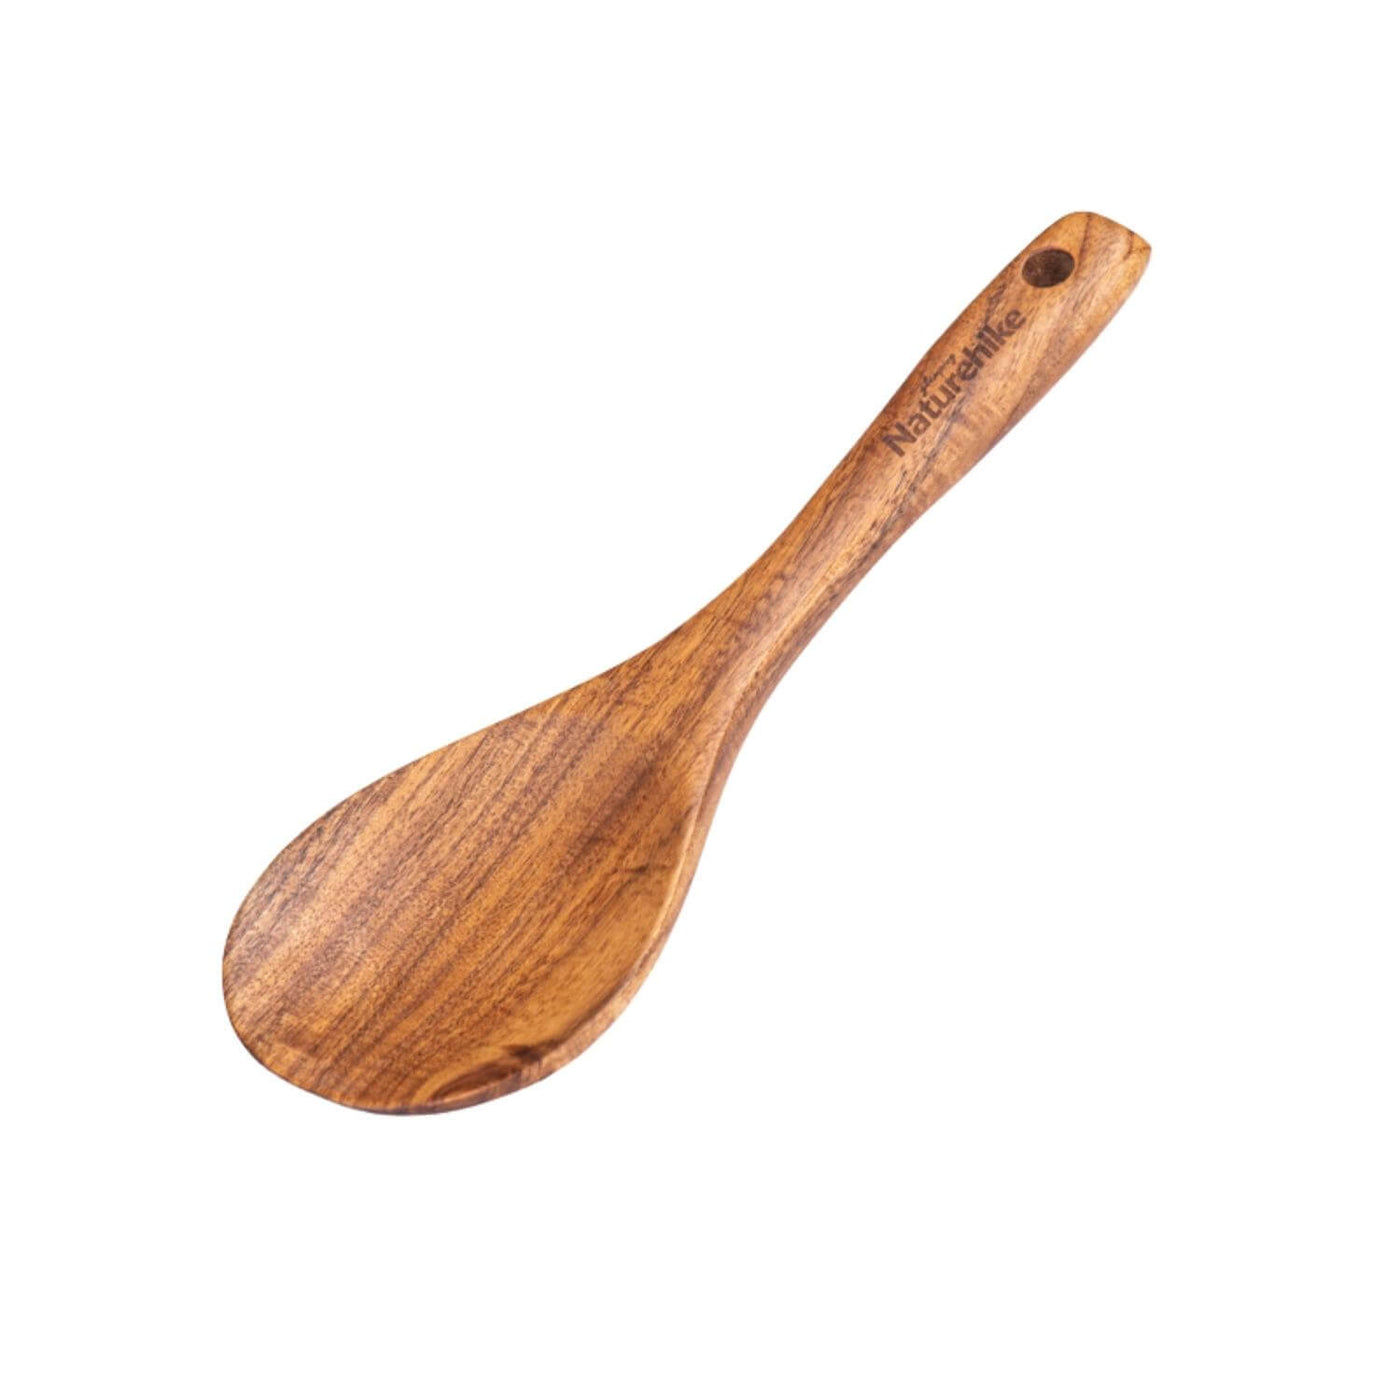 Solid wood spoons